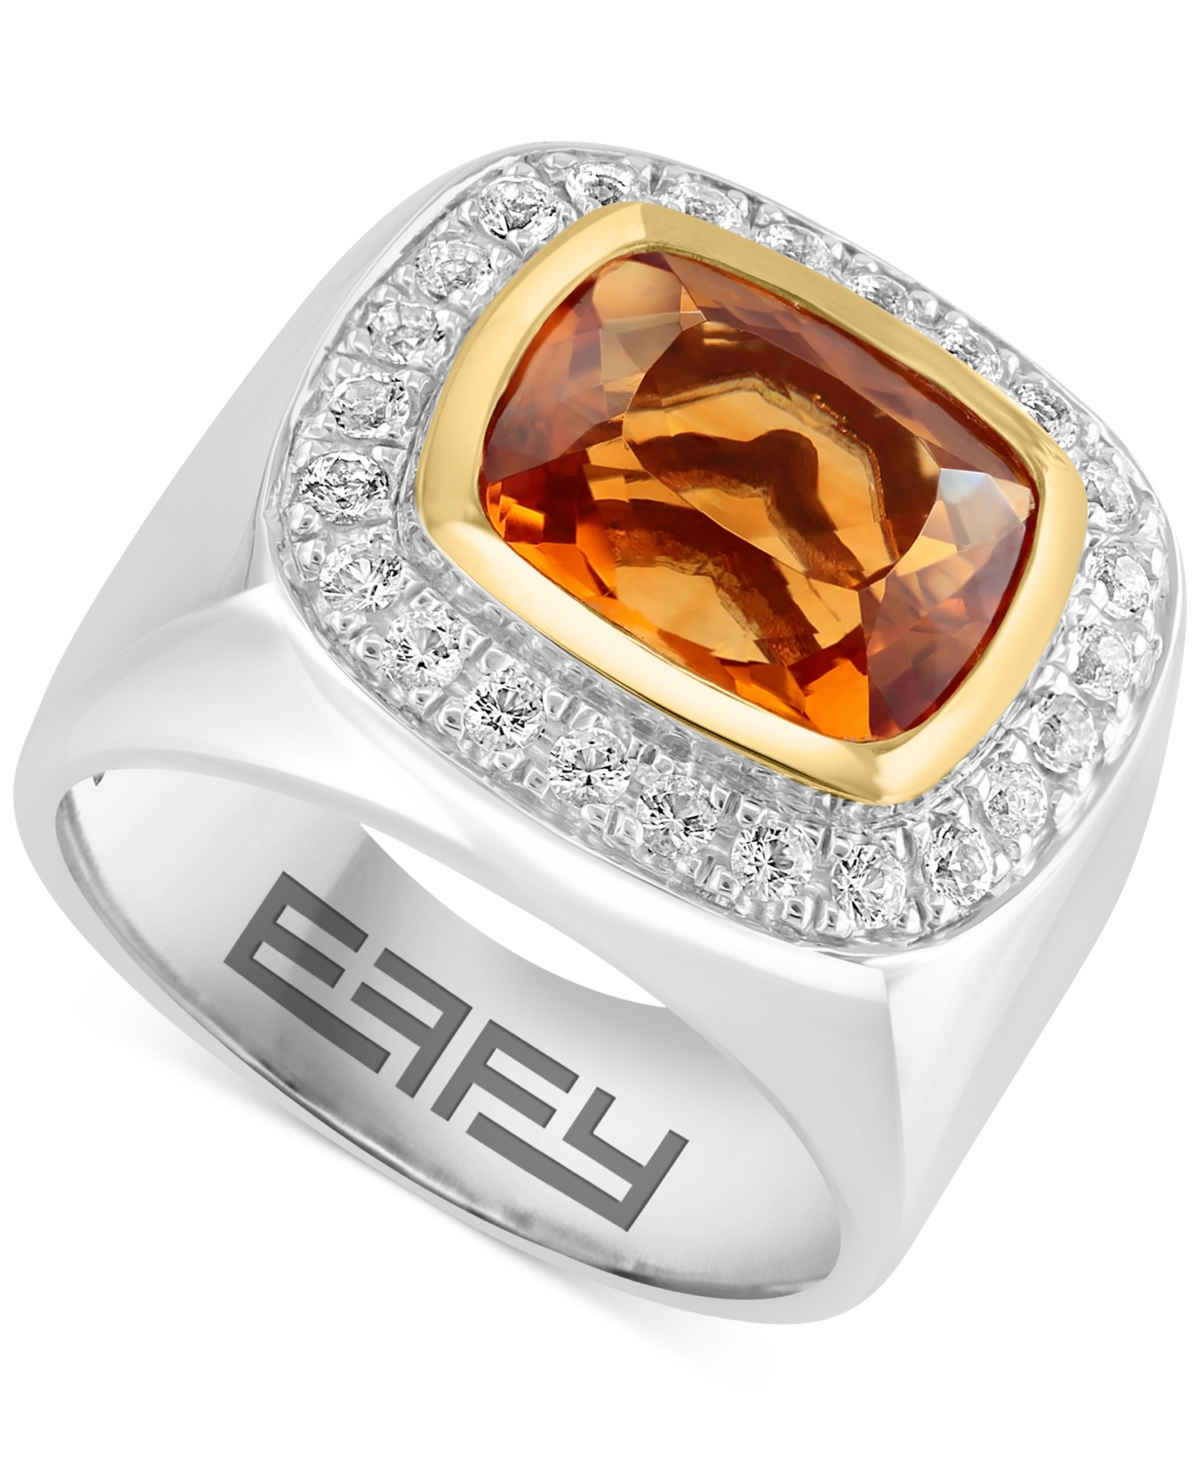 Effy Men's Madeira Citrine (6 ct. t.w.) & White Topaz (3/4 ct. t.w.) Ring in Sterling Silver & 18K Gold-Plate - Sterling Silver